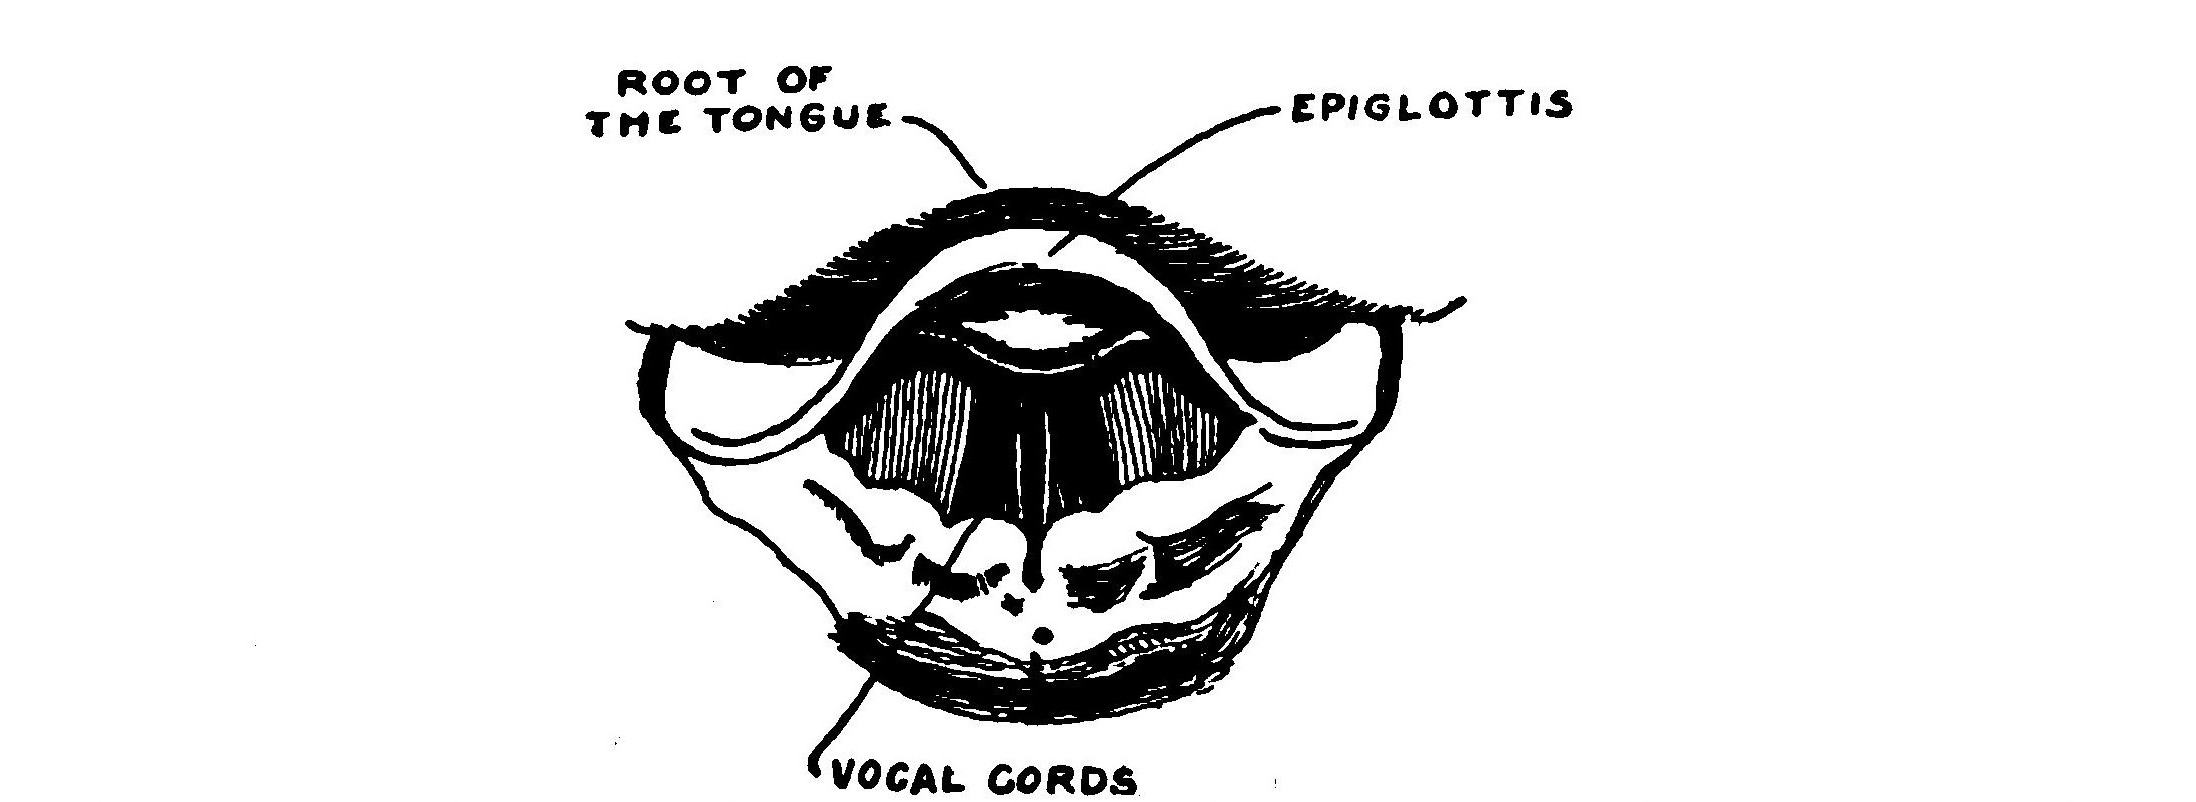 FIG. 127.—The vocal cords in position for making a sound.